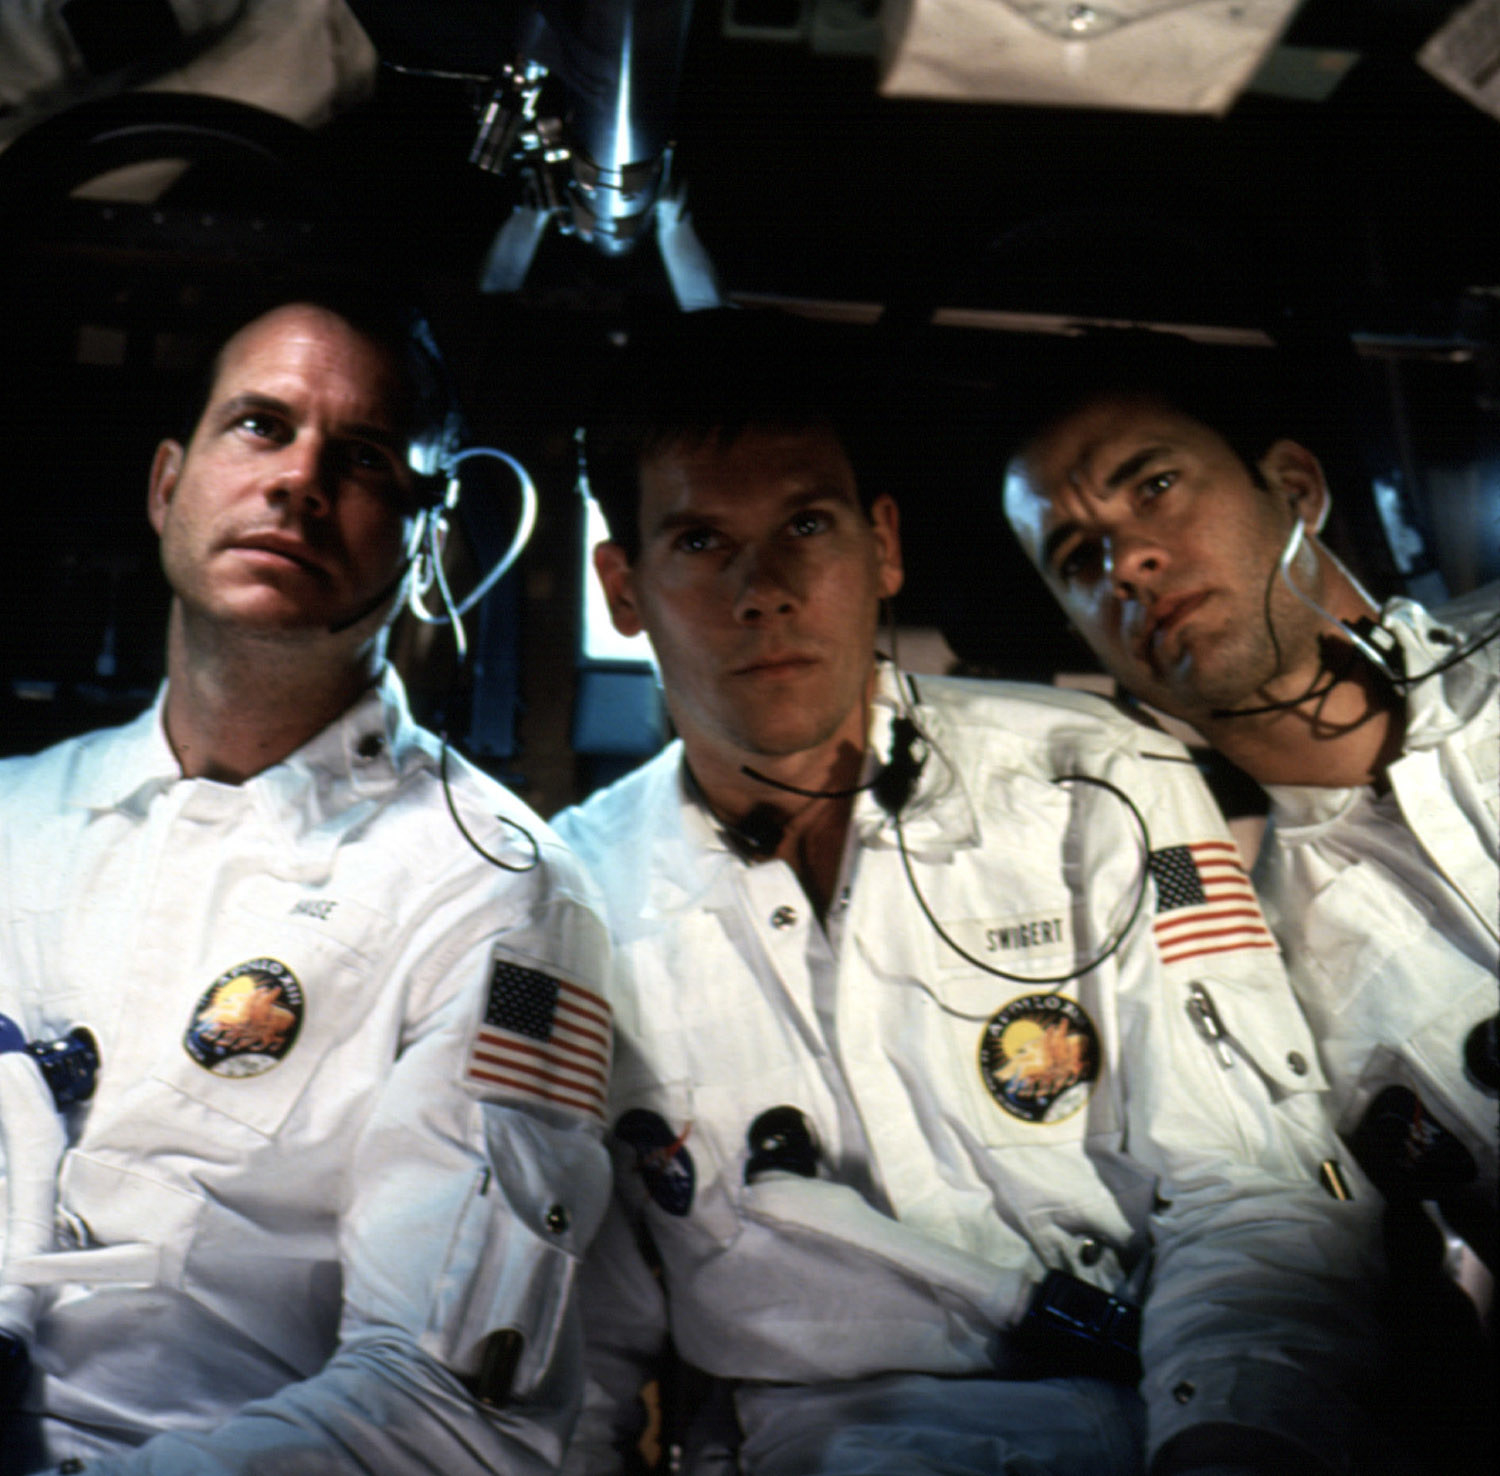 The three astronauts in their uniforms